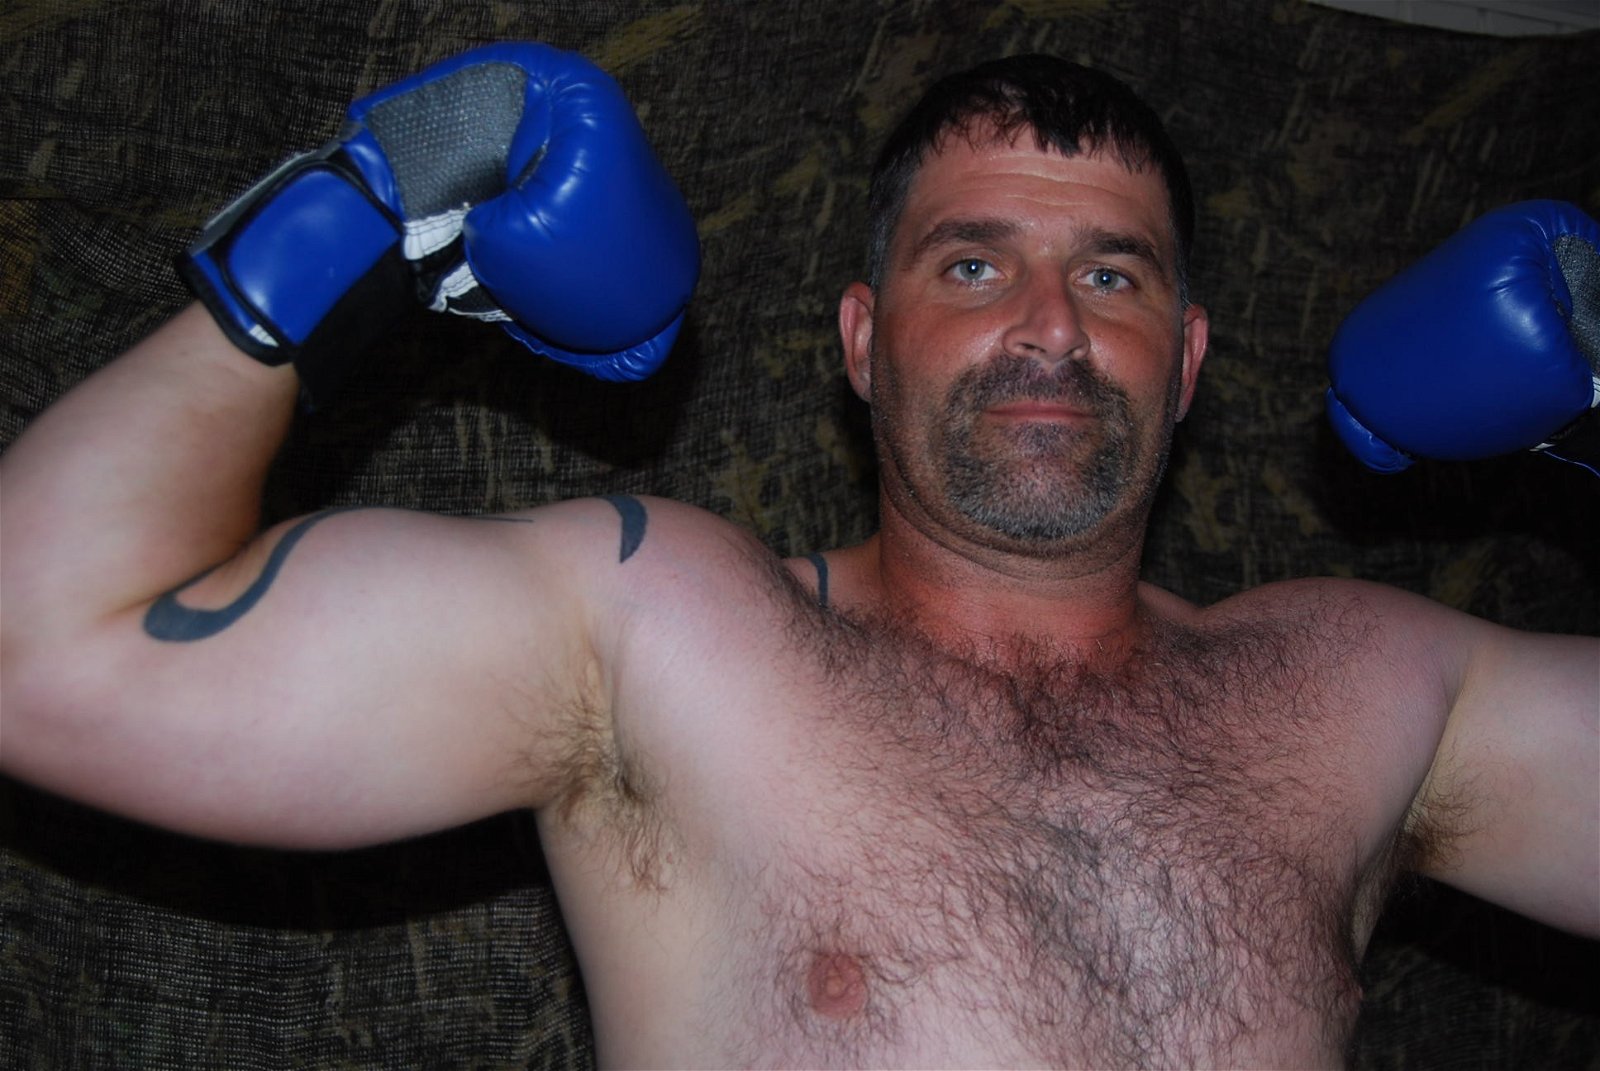 Photo by Hairy Musclebears with the username @hairymusclebears,  September 24, 2019 at 3:26 AM and the text says 'Boxing Goatee Musclebear Man from USAFUR.com galleries #GayDaddy #Instagay #GayChub #GayCub #hairybelly #BearPhotoADay #gaychubby #bearweek365 #bearsofinstagram #moobs #humanpuppy #humanpupplay #gaypupplay #gayexercisepup #gaymuscle #puppypride #gaykink..'